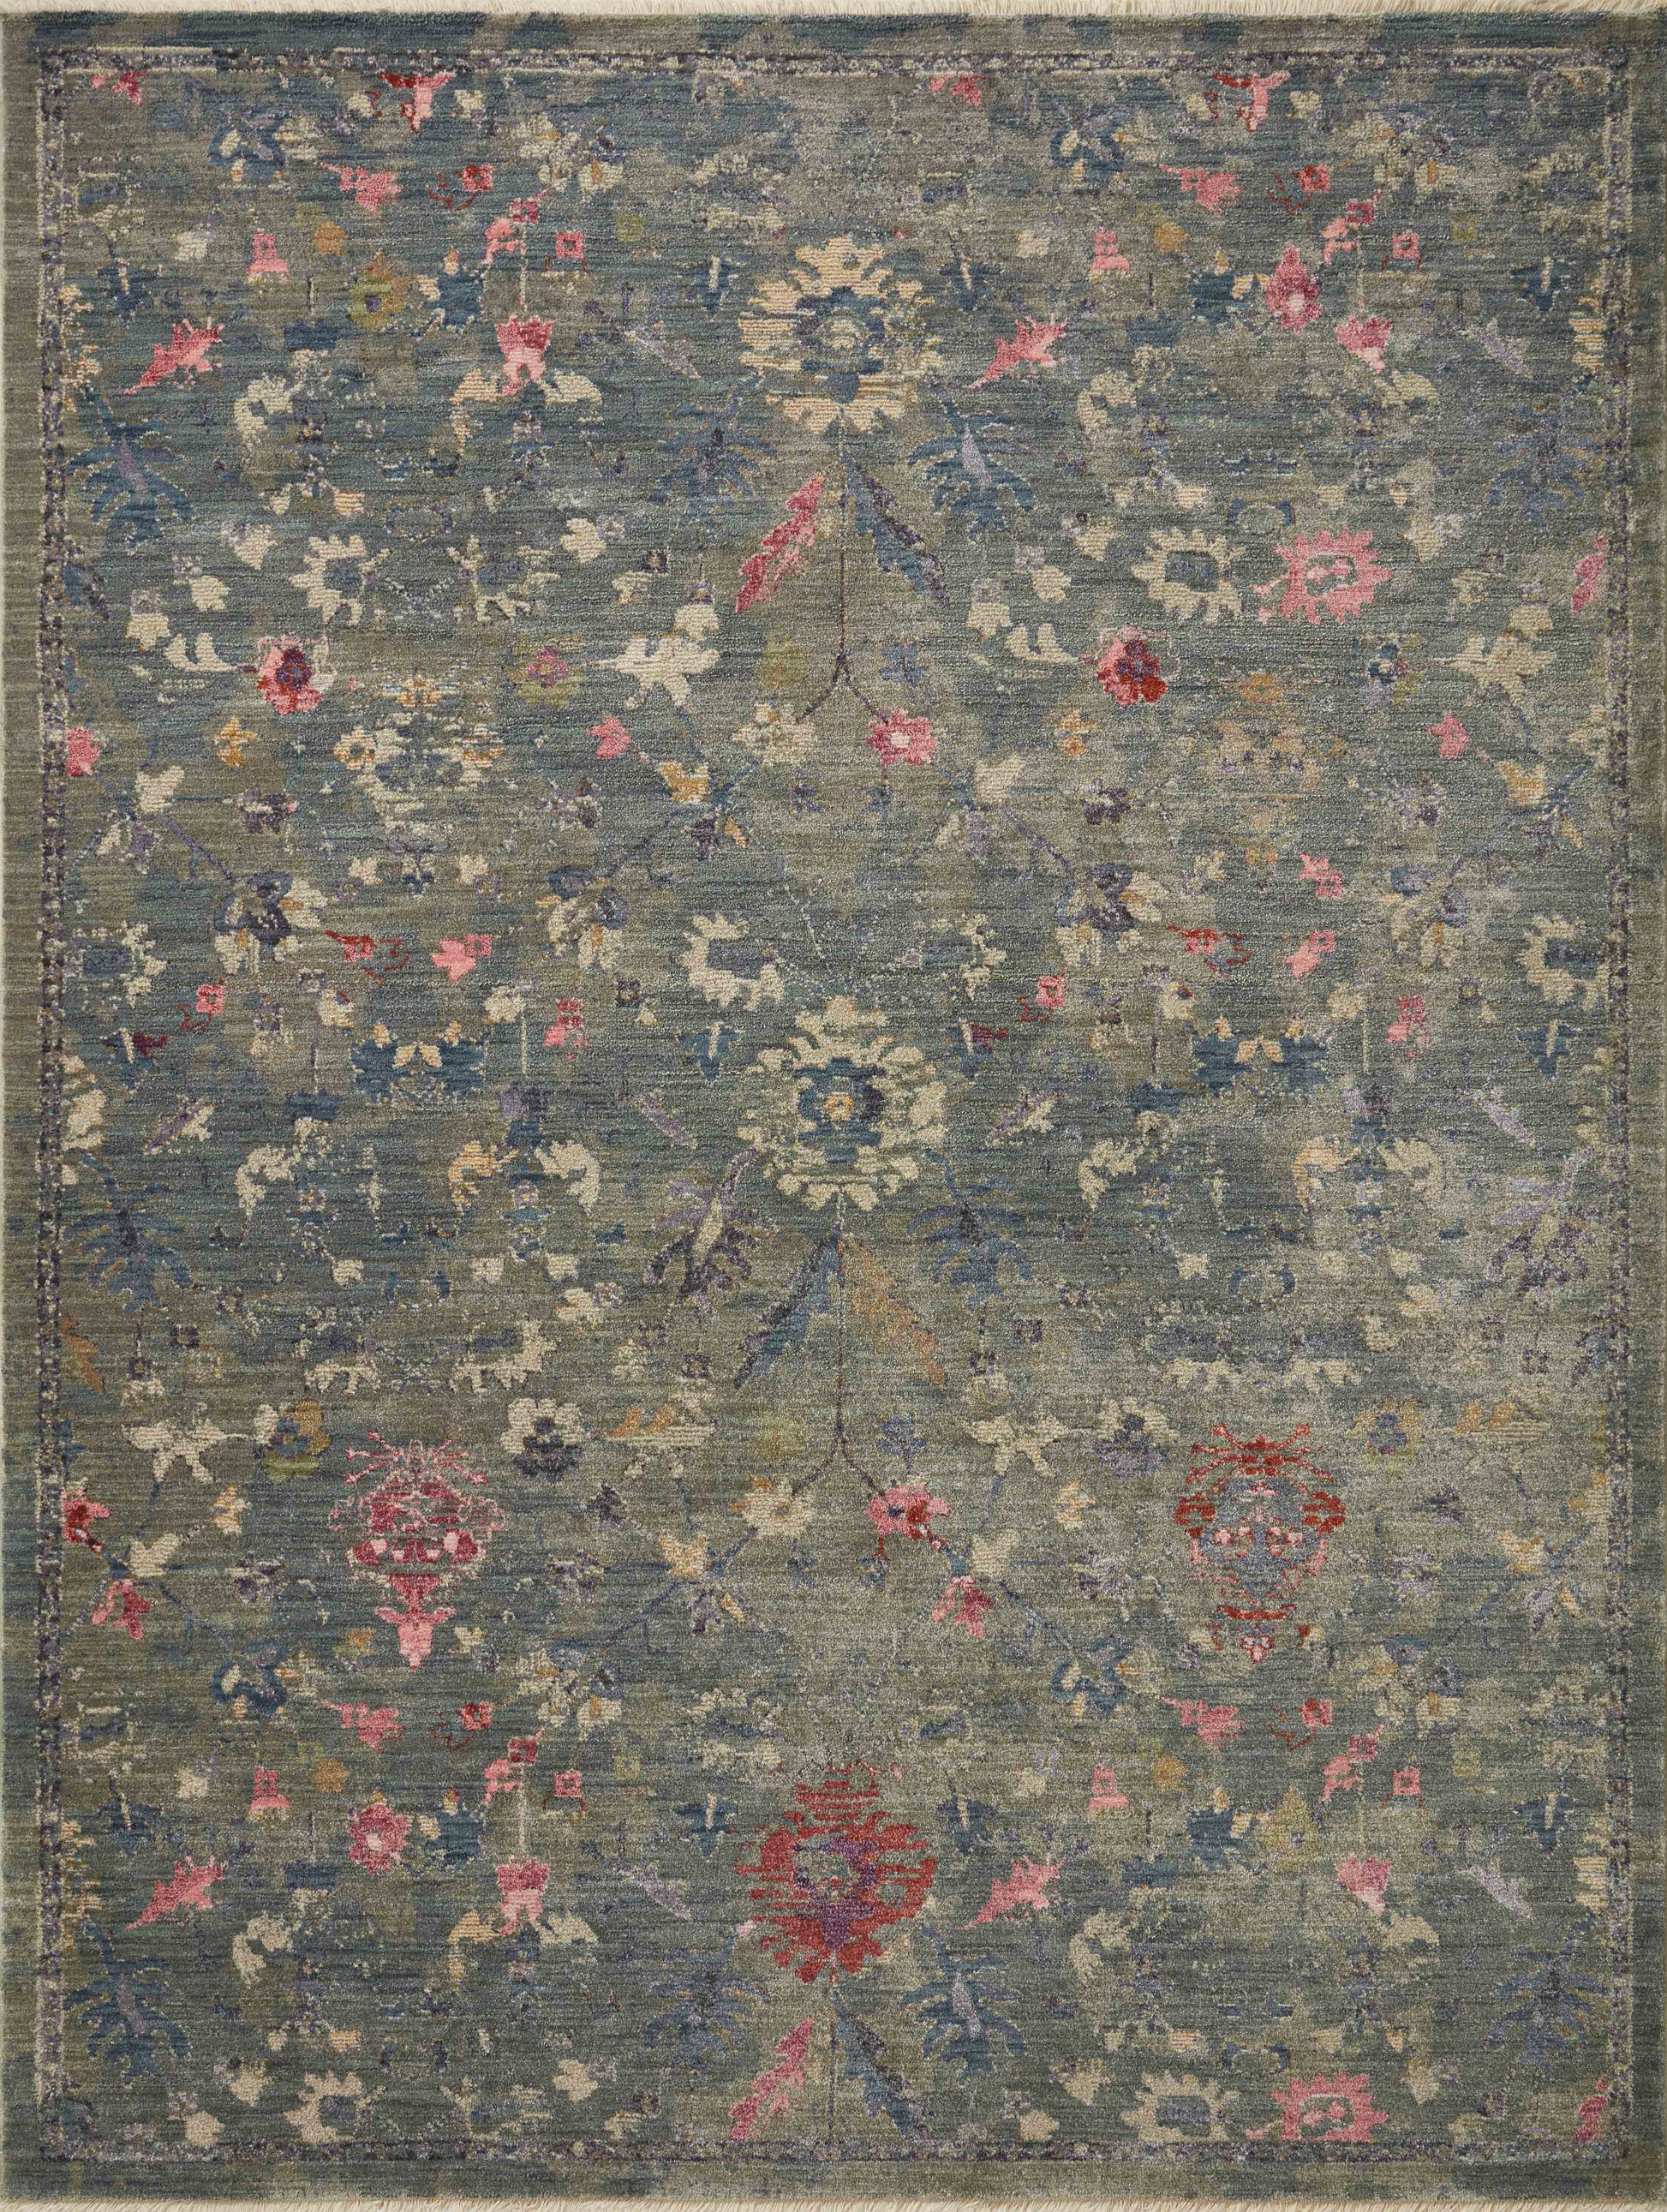 A picture of Loloi's Giada rug, in style GIA-06, color Lagoon / Multi